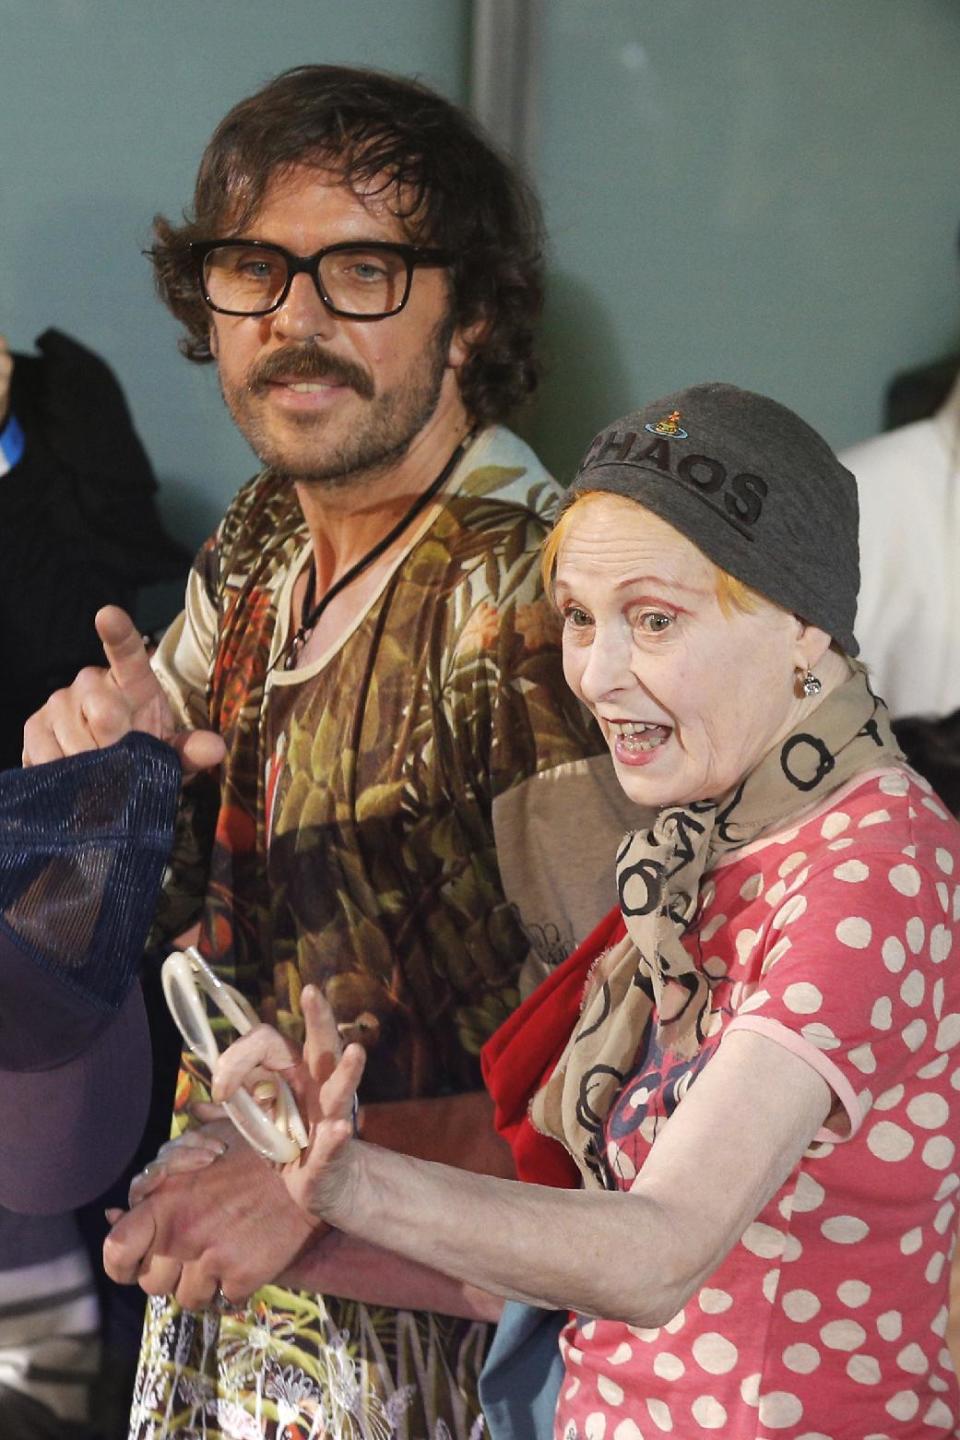 Fashion designer Vivienne Westwood, right, and Andreas Kronthaler acknowledge applause following the presentation of Westwood's ready-to-wear Spring/Summer 2014 fashion collection, presented Saturday, Sept. 28, 2013 in Paris. (AP Photo/Christophe Ena)